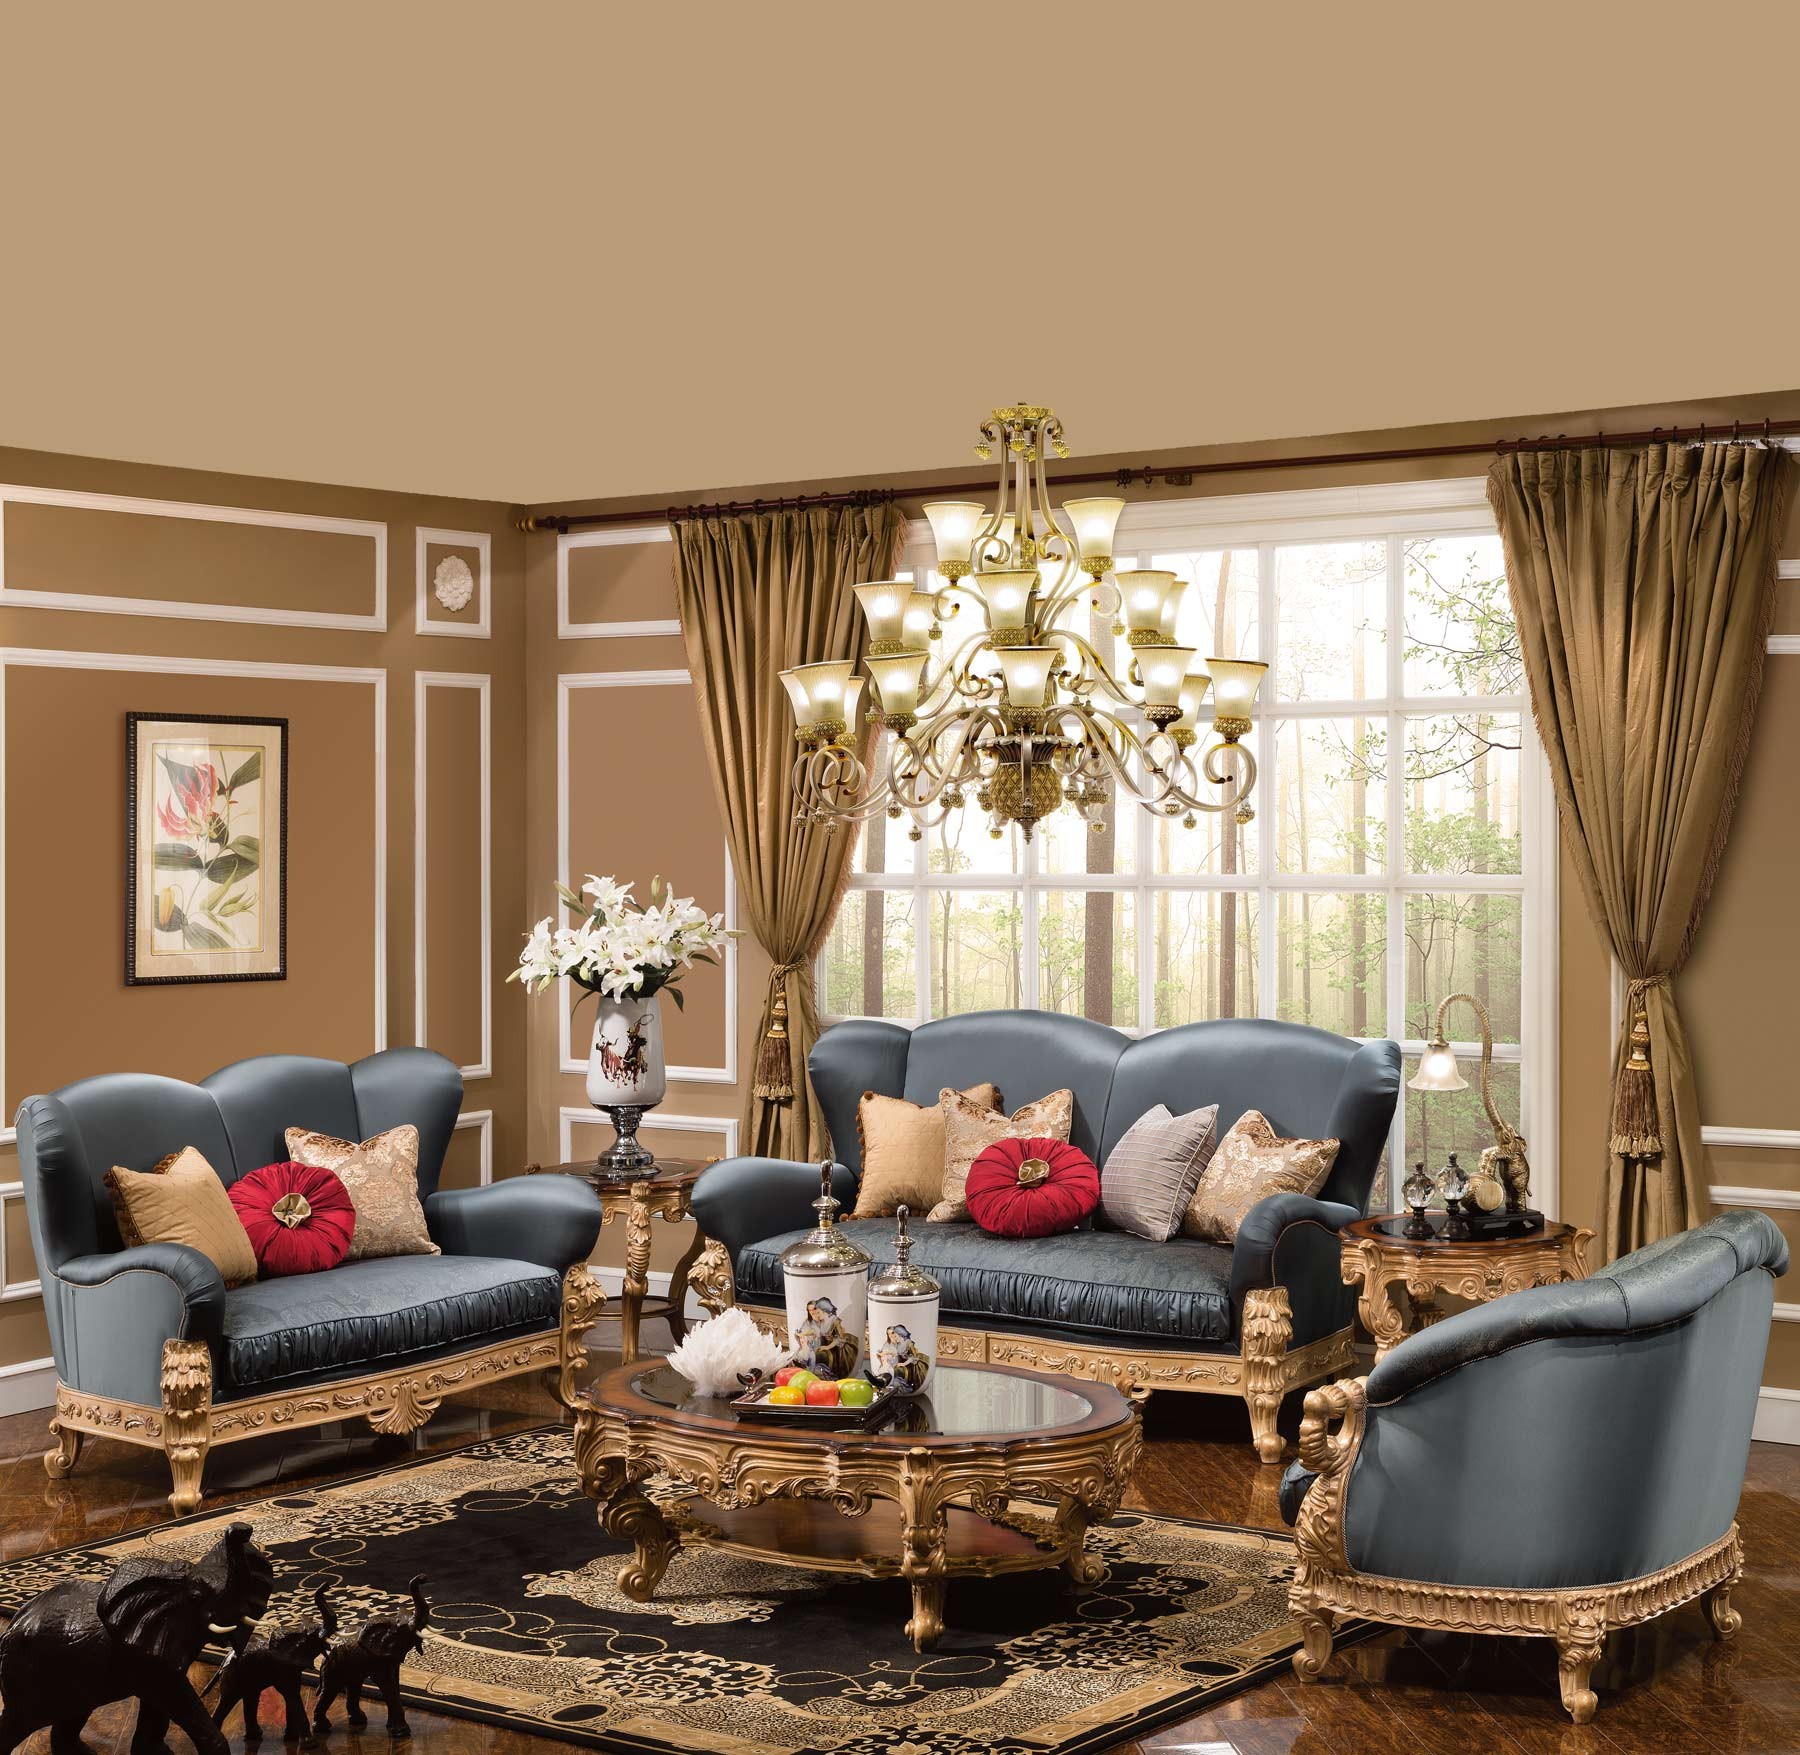 Fountaine 5-pc Living Room Set shown in an Antique Gold finish